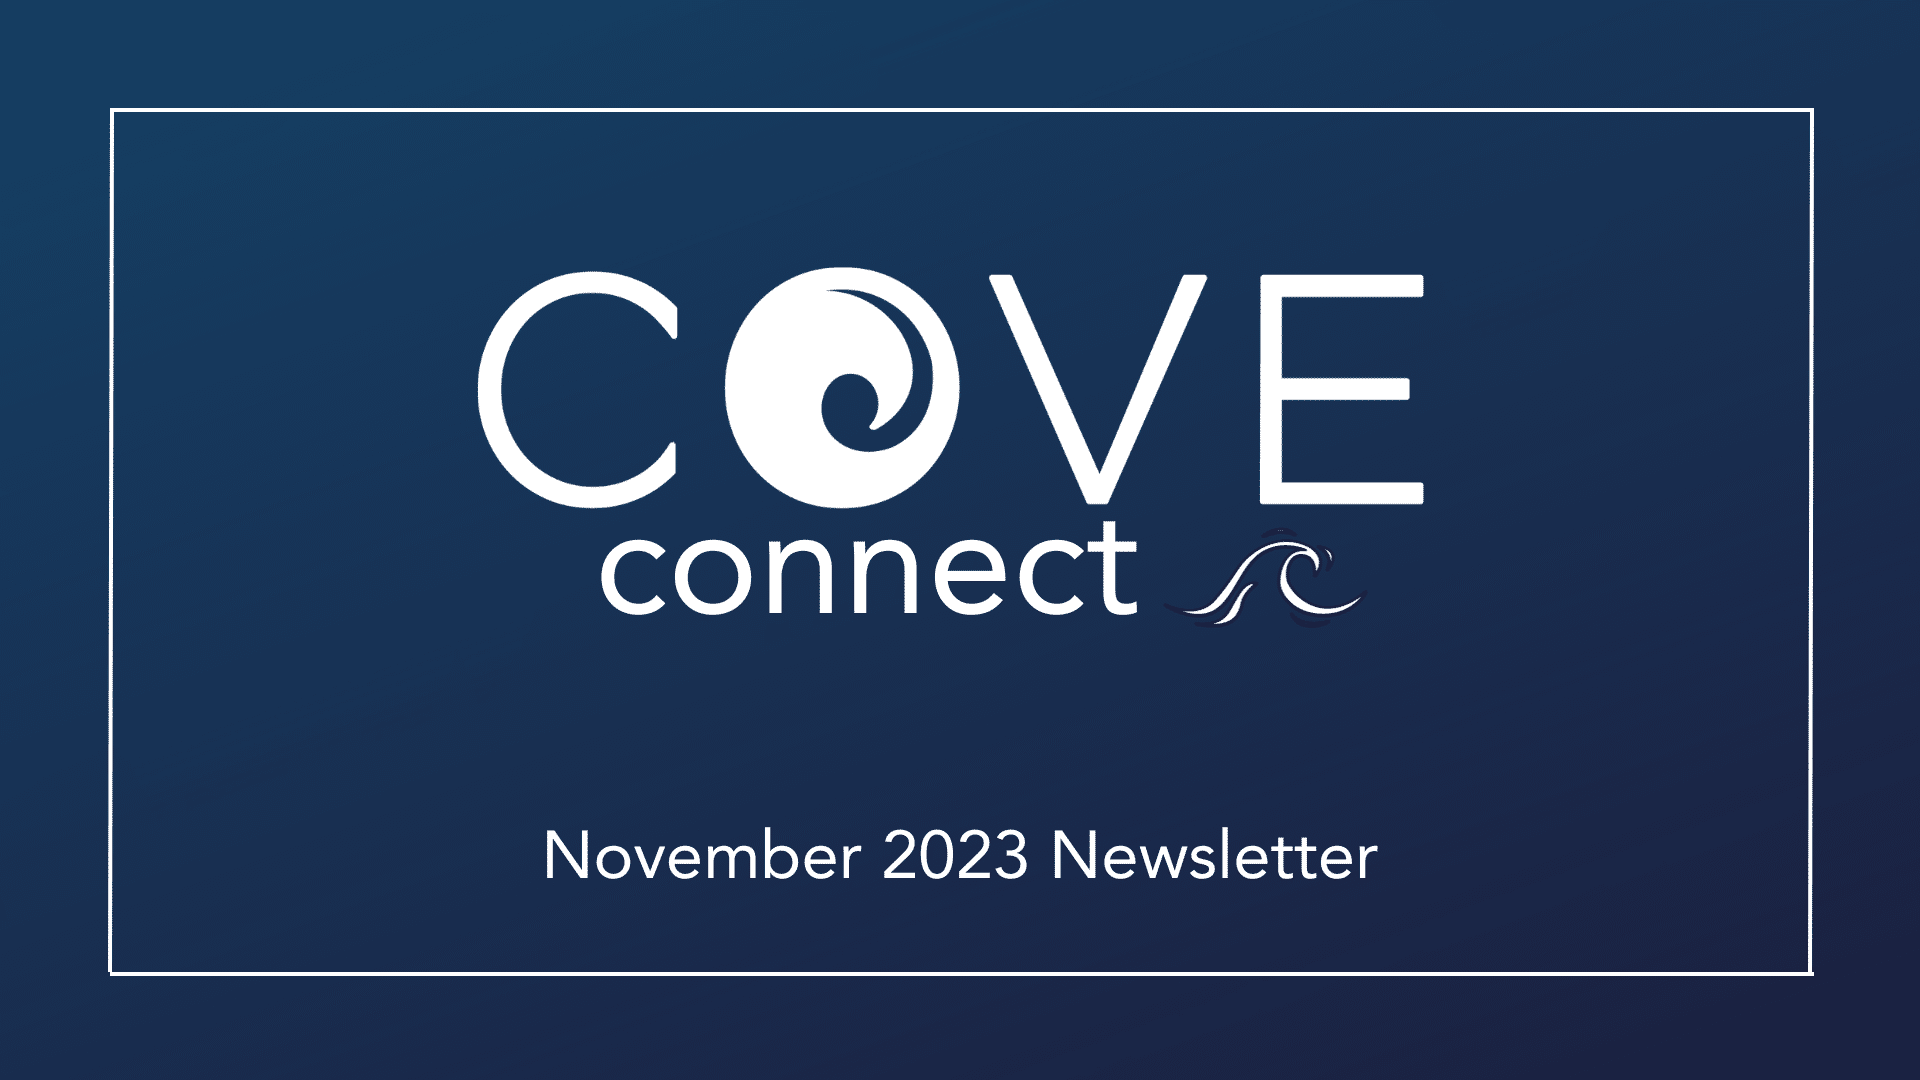 COVE Connect | November 2023